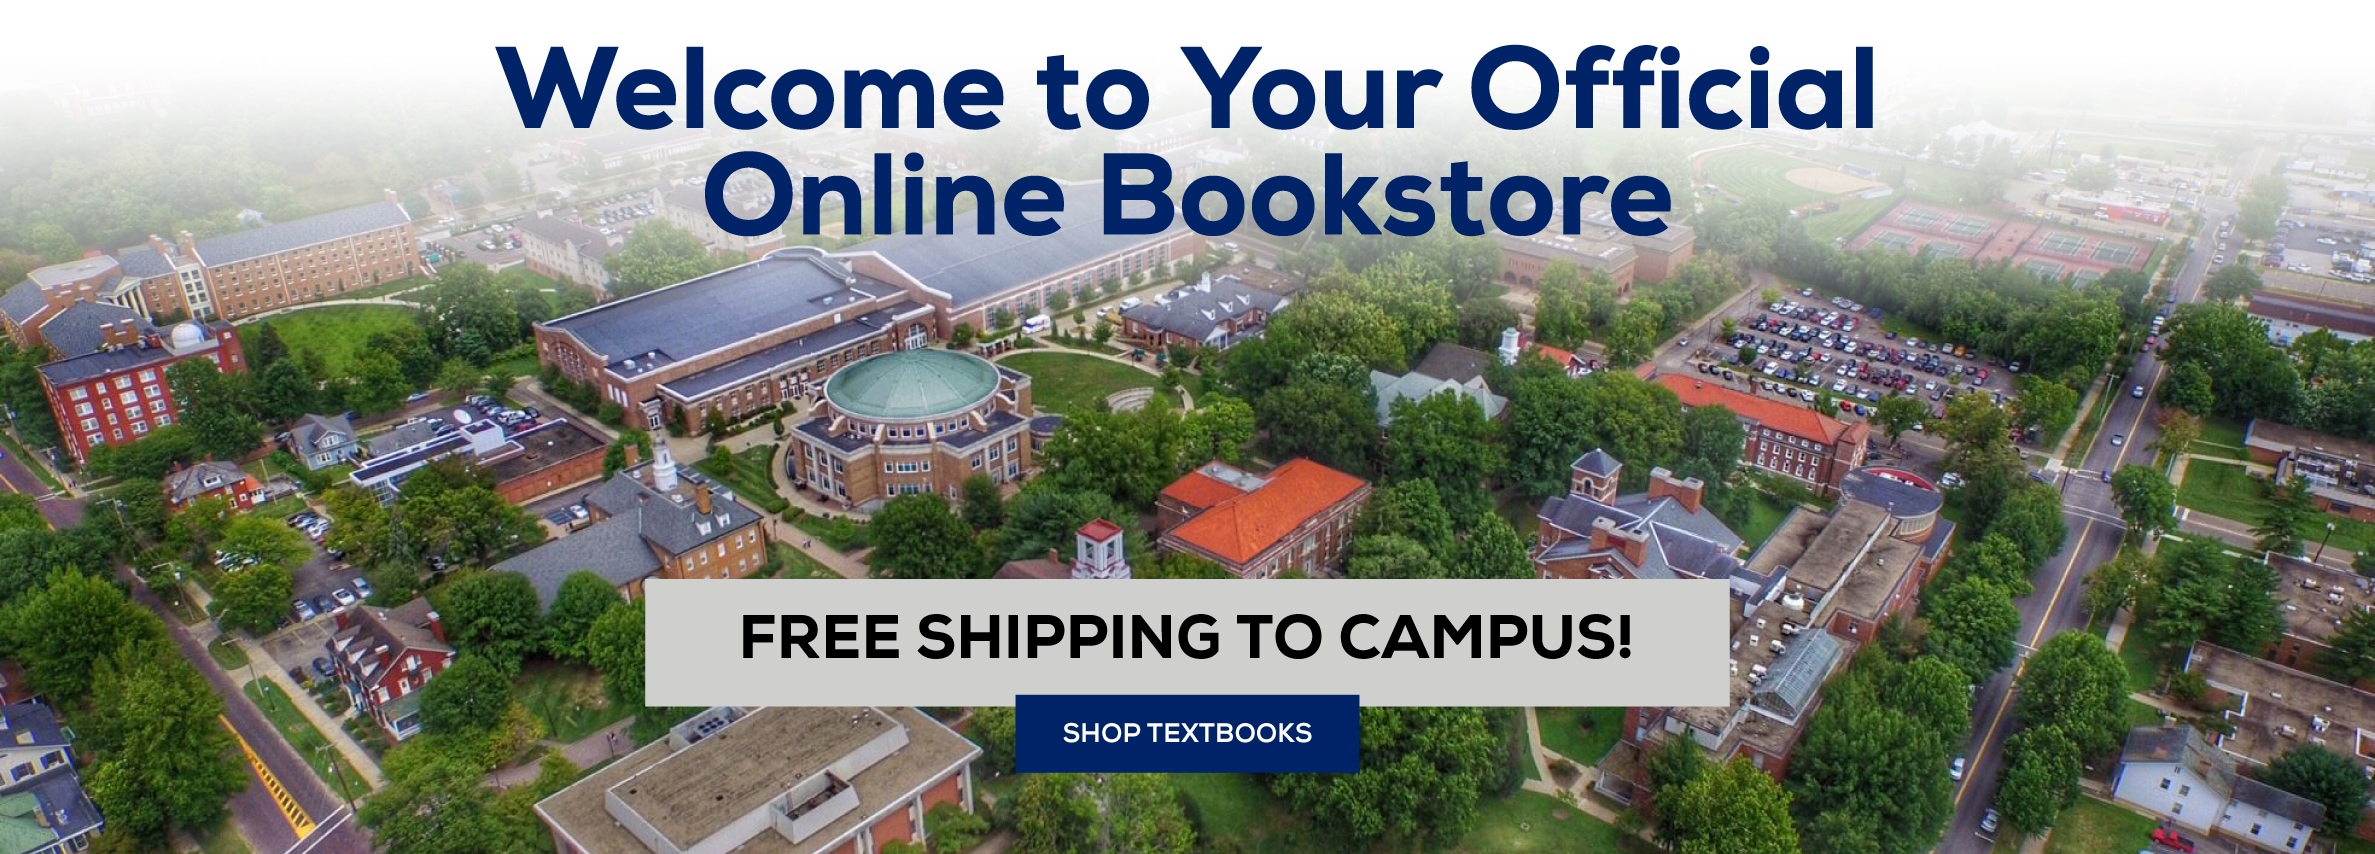 Welcome to Your New Official Online Bookstore